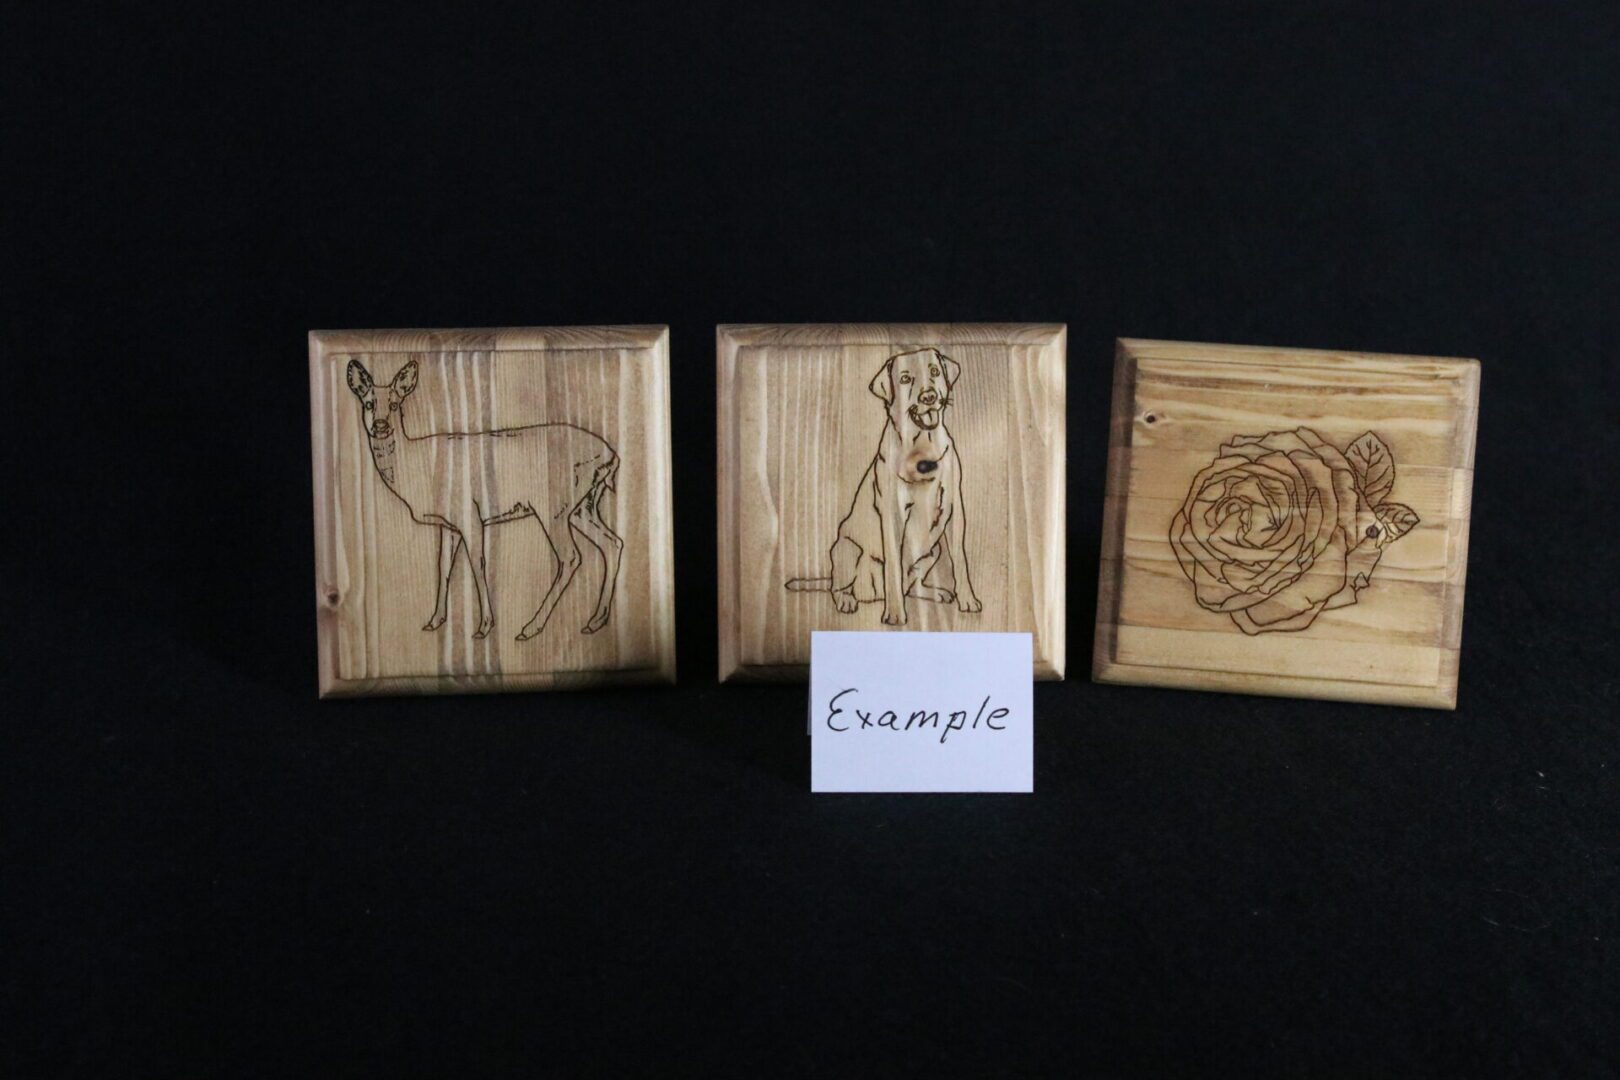 A group of three wooden pictures with different designs.